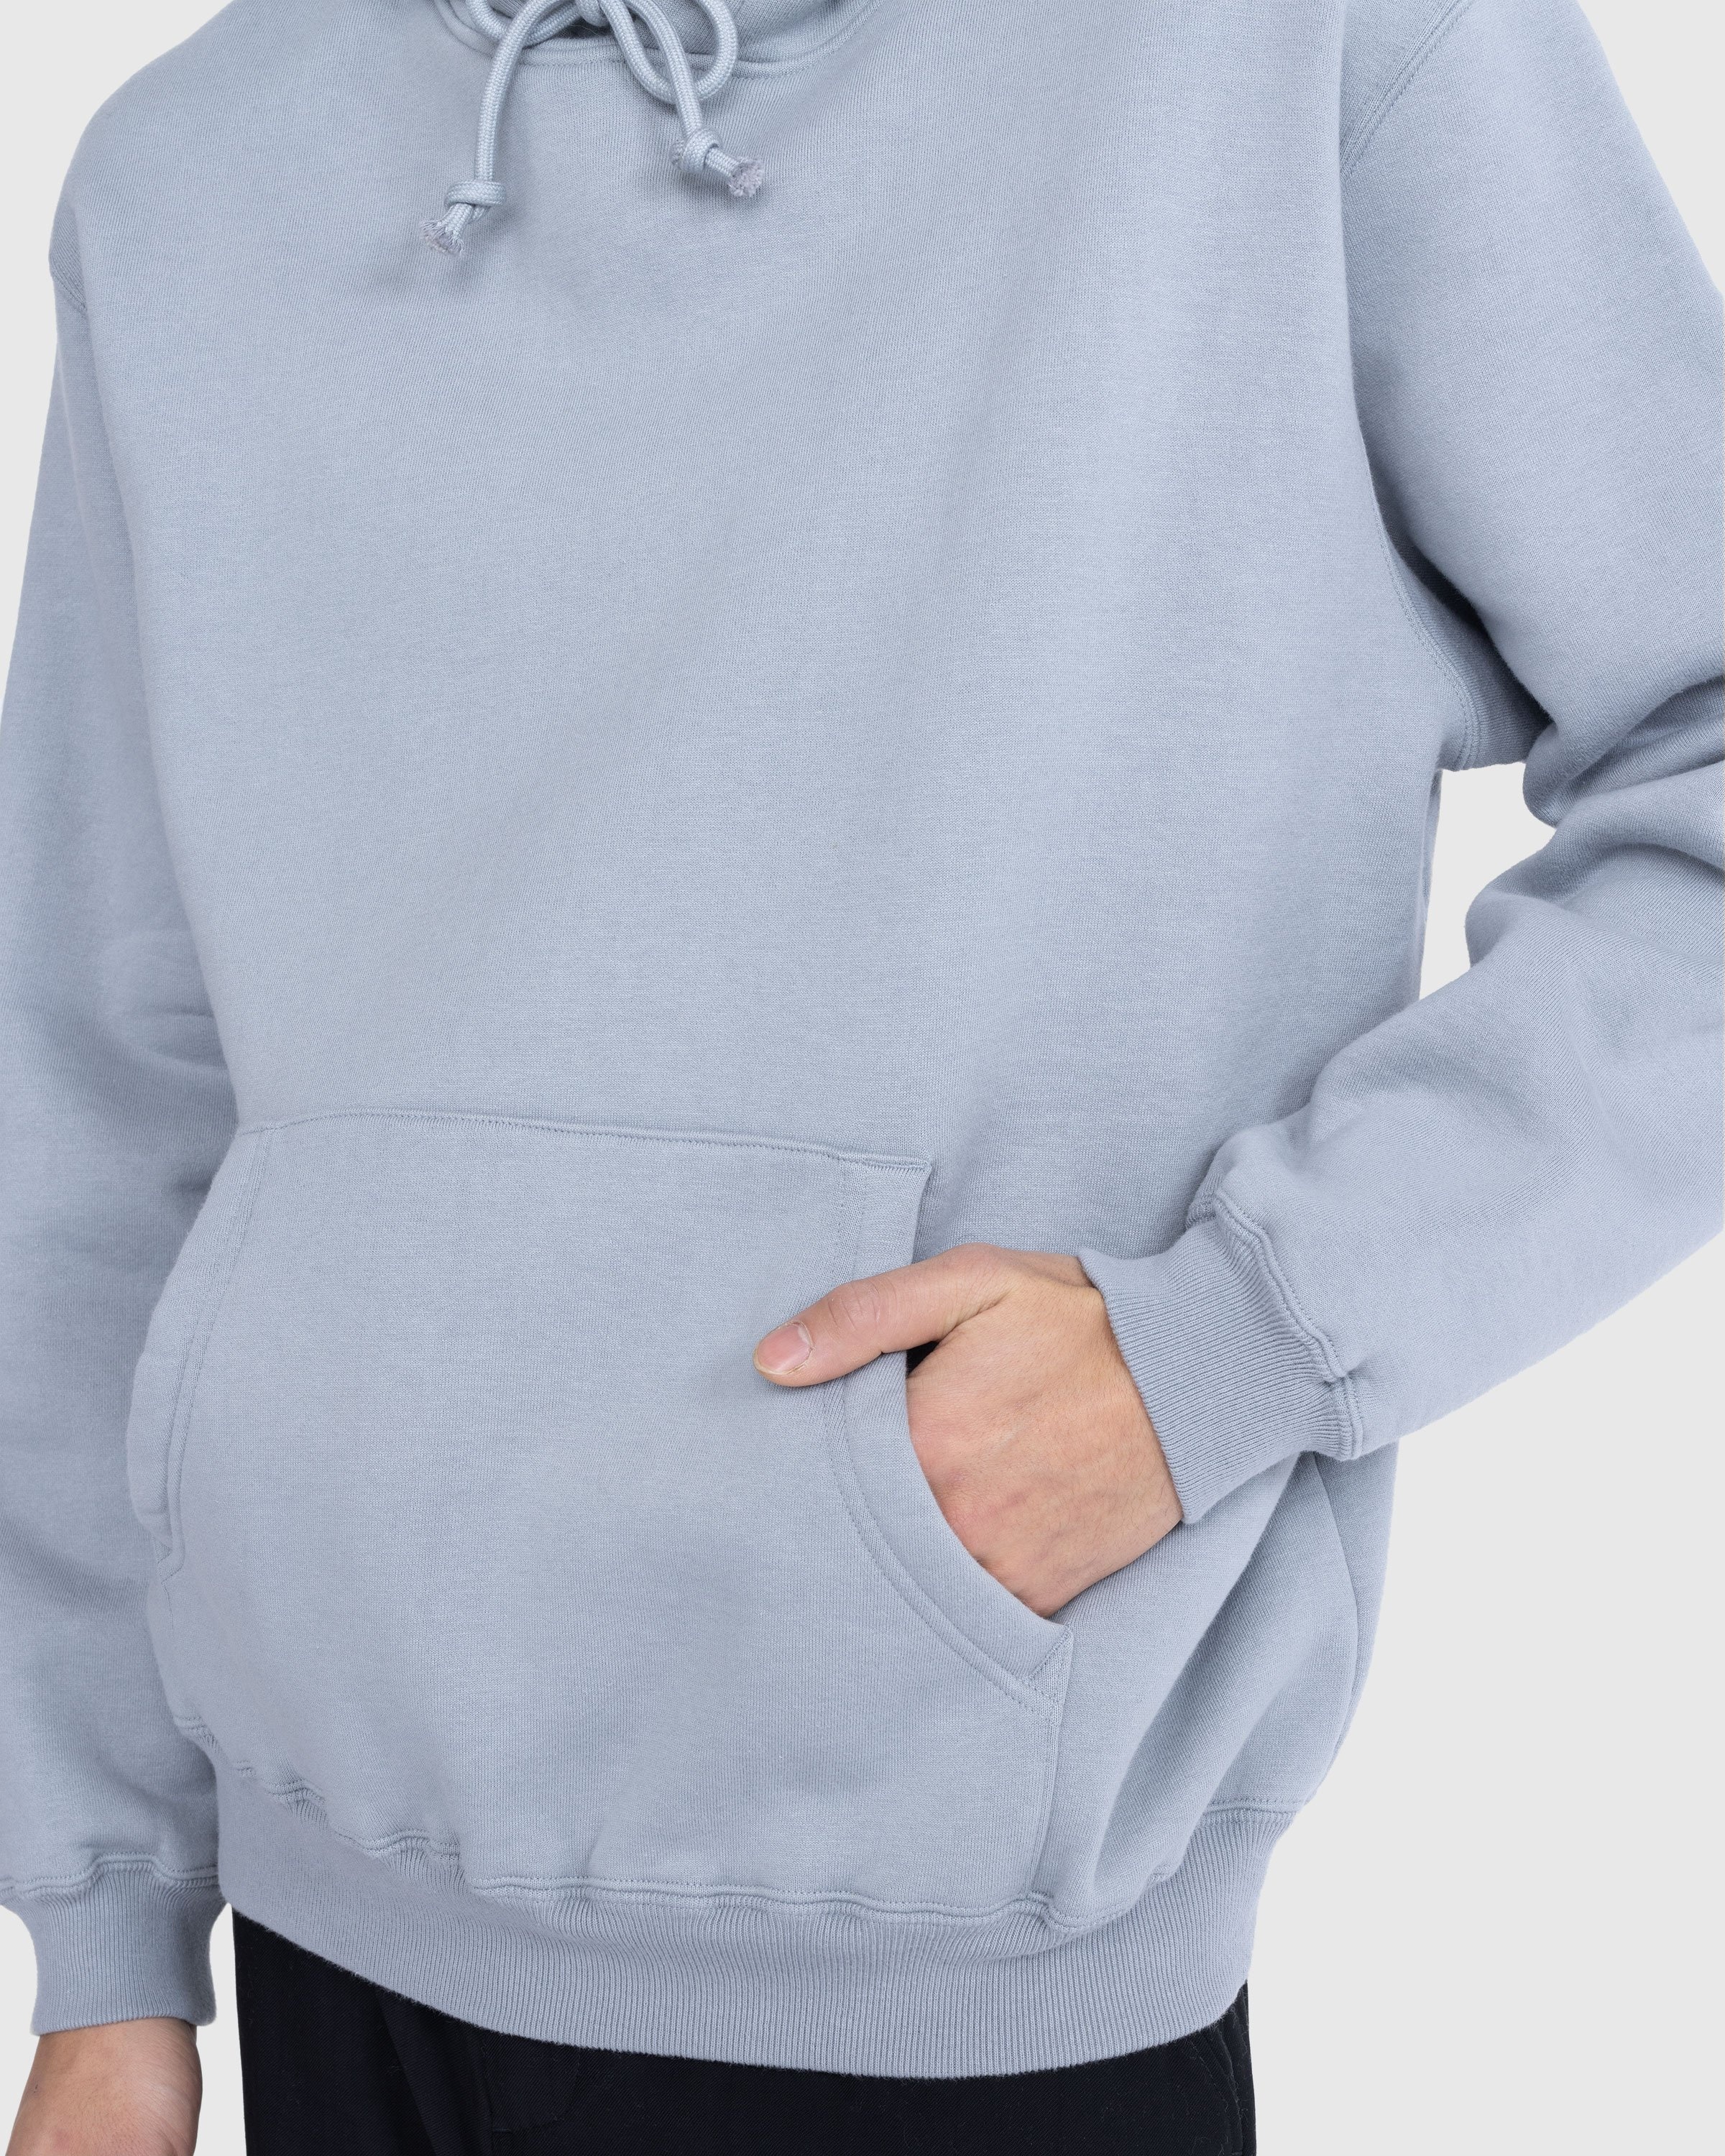 Auralee – Smooth Soft Pullover Hoodie Blue/Gray